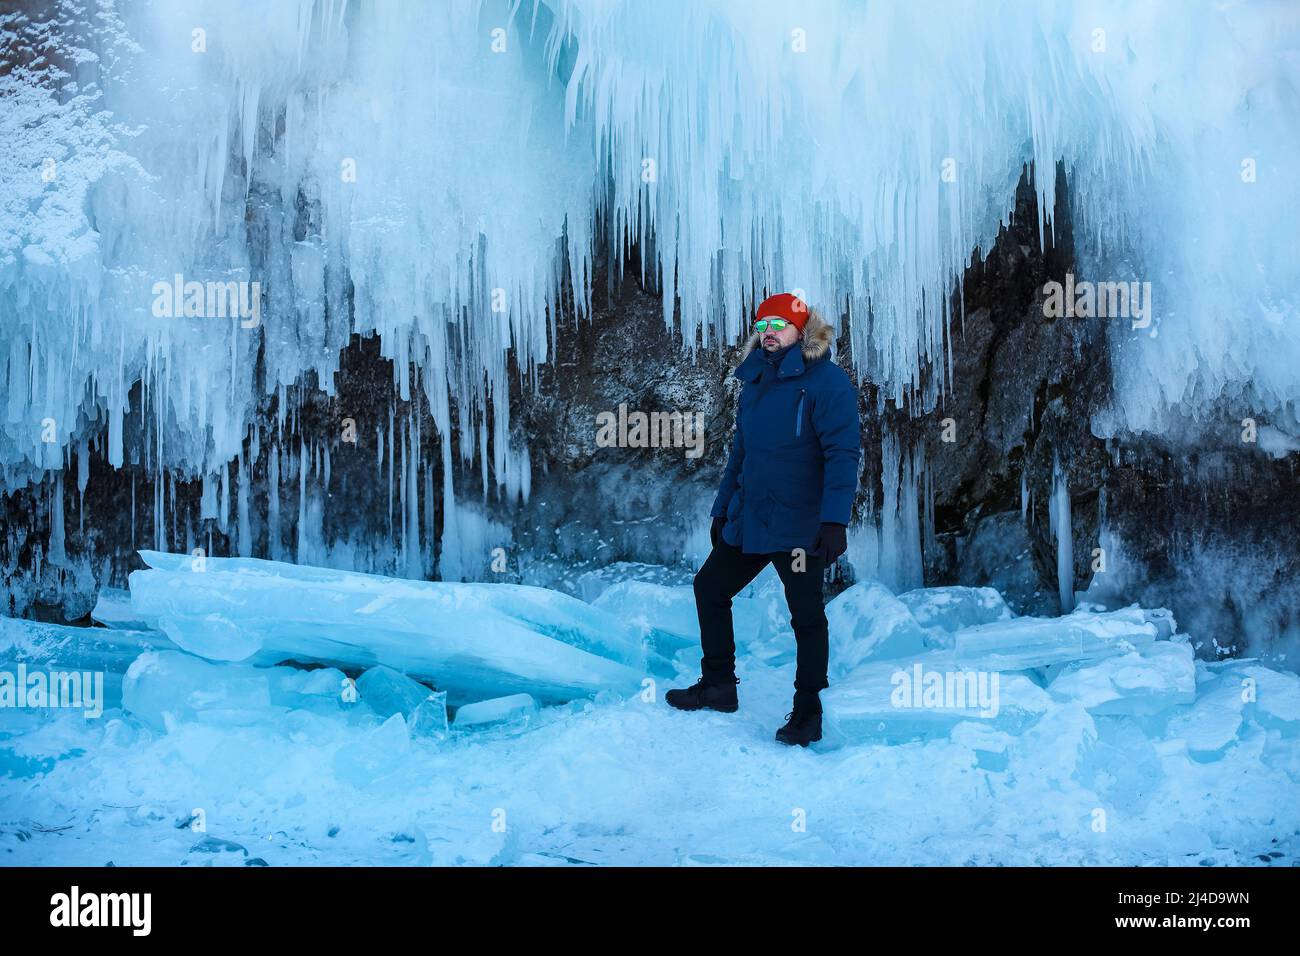 Travel and winter holiday. Lake Baikal. Portrait of the man tourist in red cap and blue jacket wearing sunglasses on ice Stock Photo